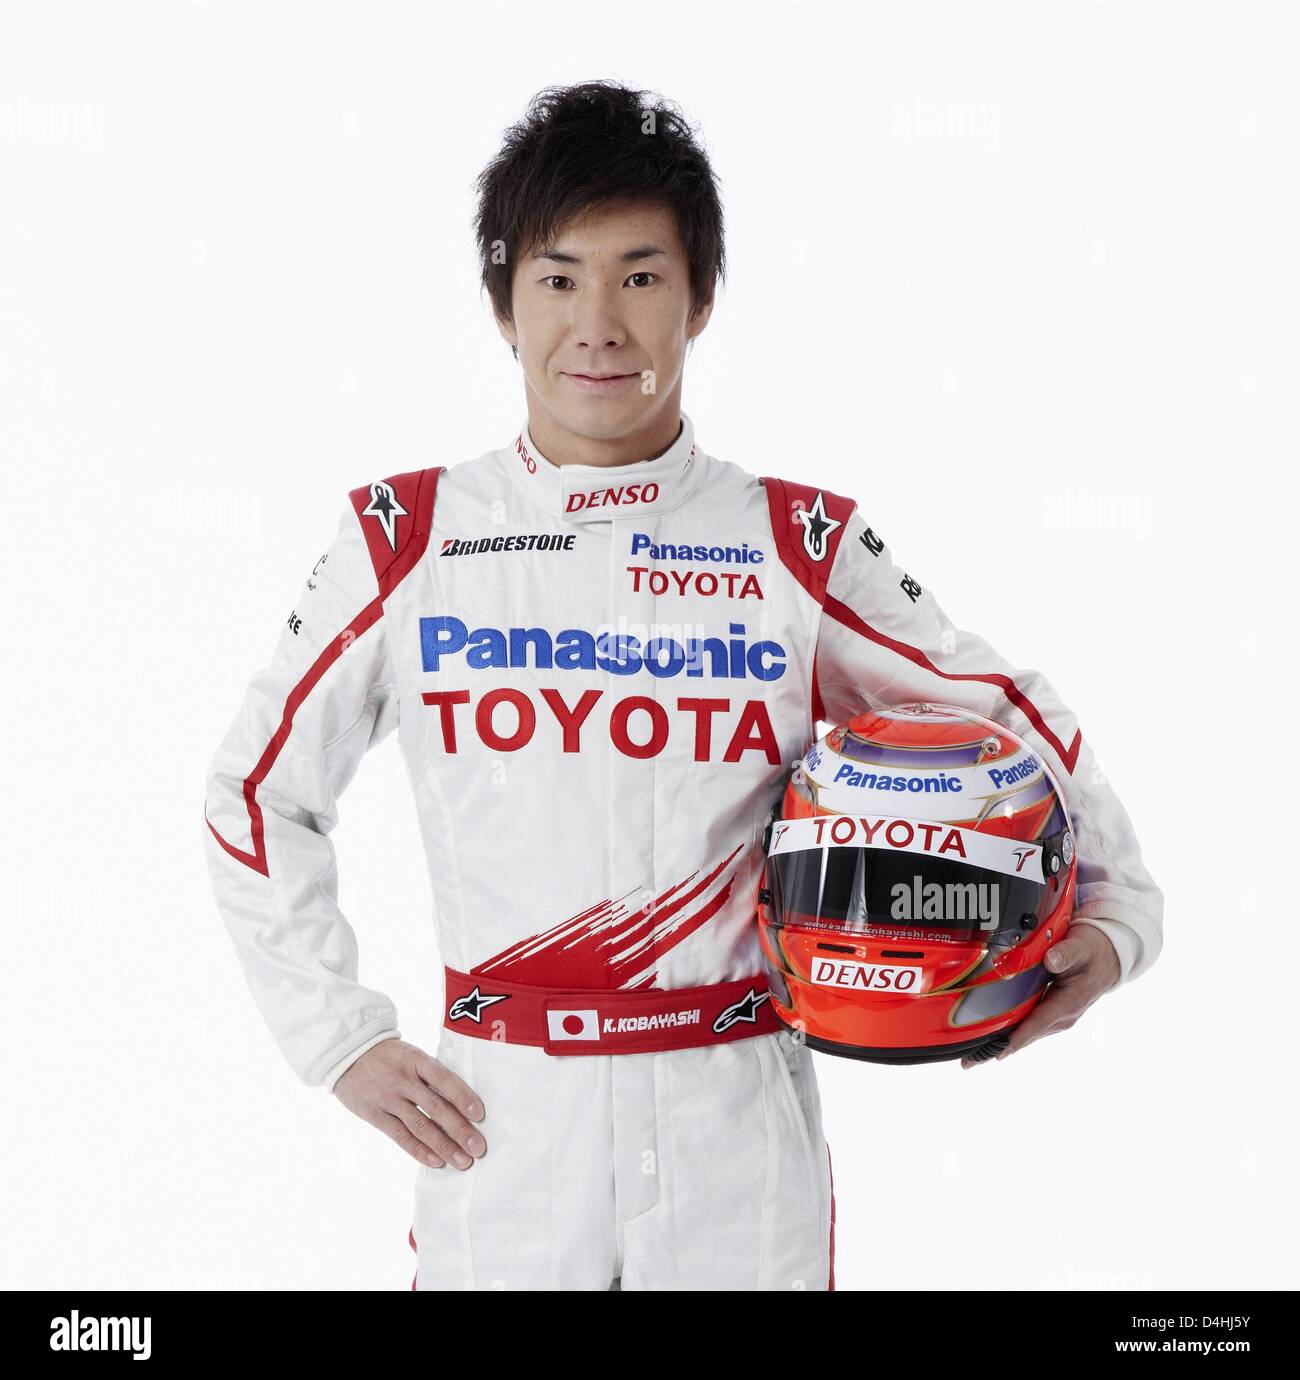 Japanese Formula One test driver Kamui Kobayashi is pictured during an online presentation of the new Toyota Formula One racing car TF109 for 2009, 15 January 2009. Photo: PANASONIC TOYOTA RACING (Attention: Editorial use only) Stock Photo